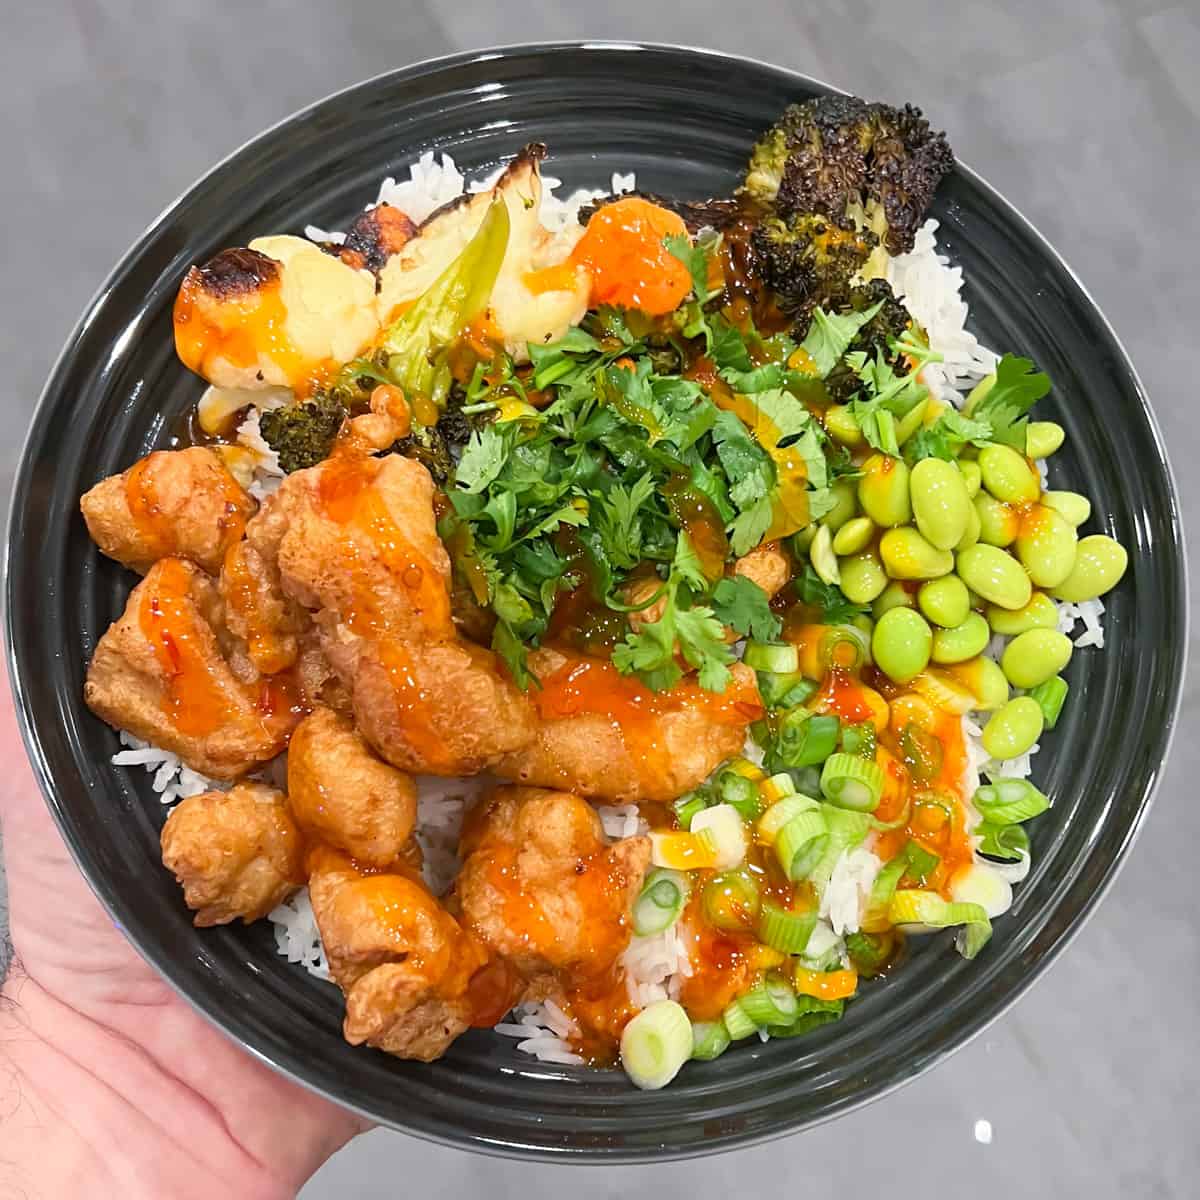 A bowl being held in the air with rice chicken and vegetables.